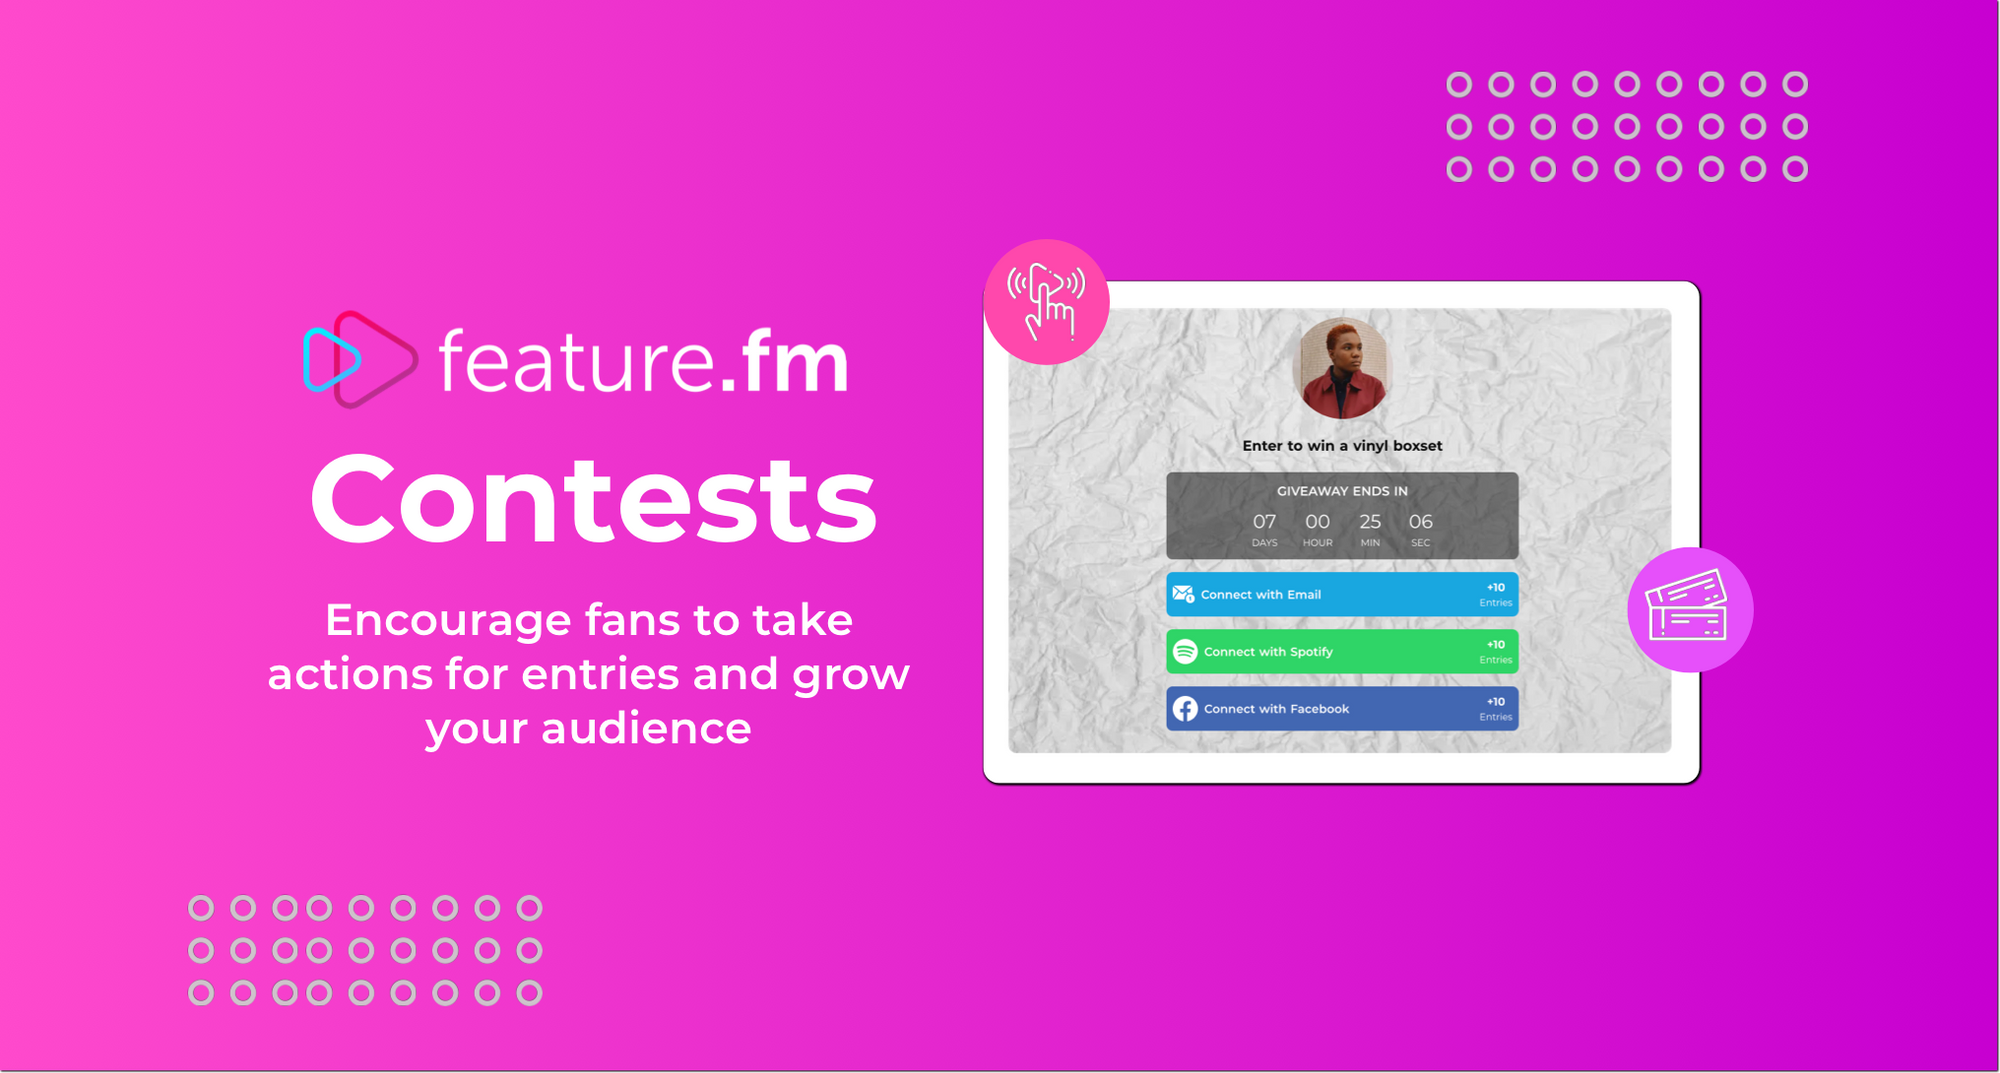 New: Run contests to rapidly engage and grow your audience